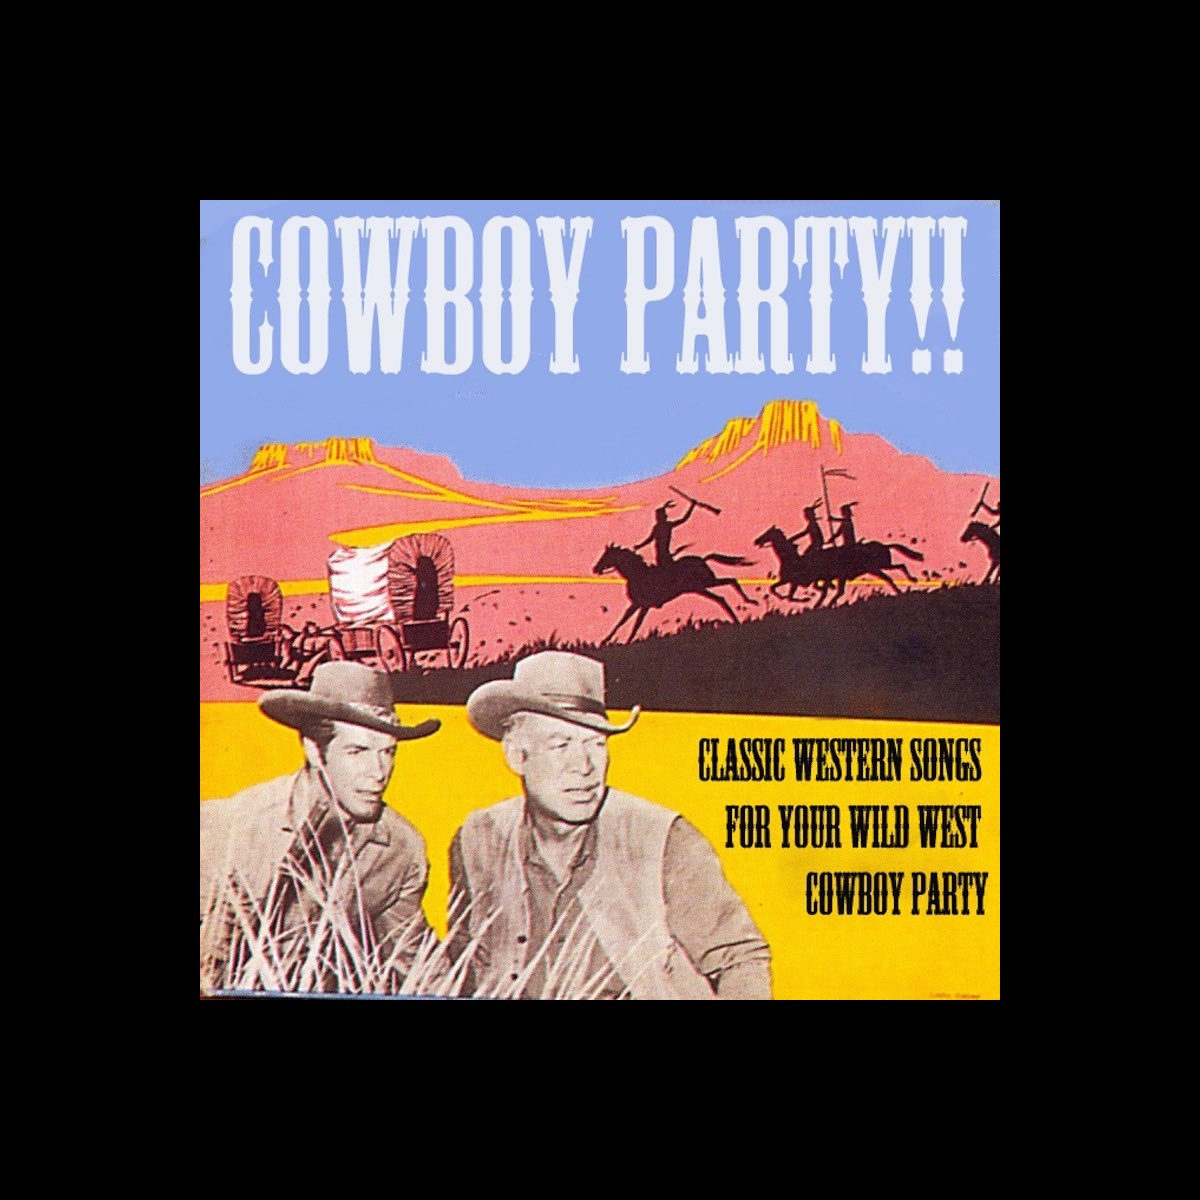 Cowboy Party! Classic Western Songs for Your Wild West Cowboy Party! by  Various Artists on Apple Music